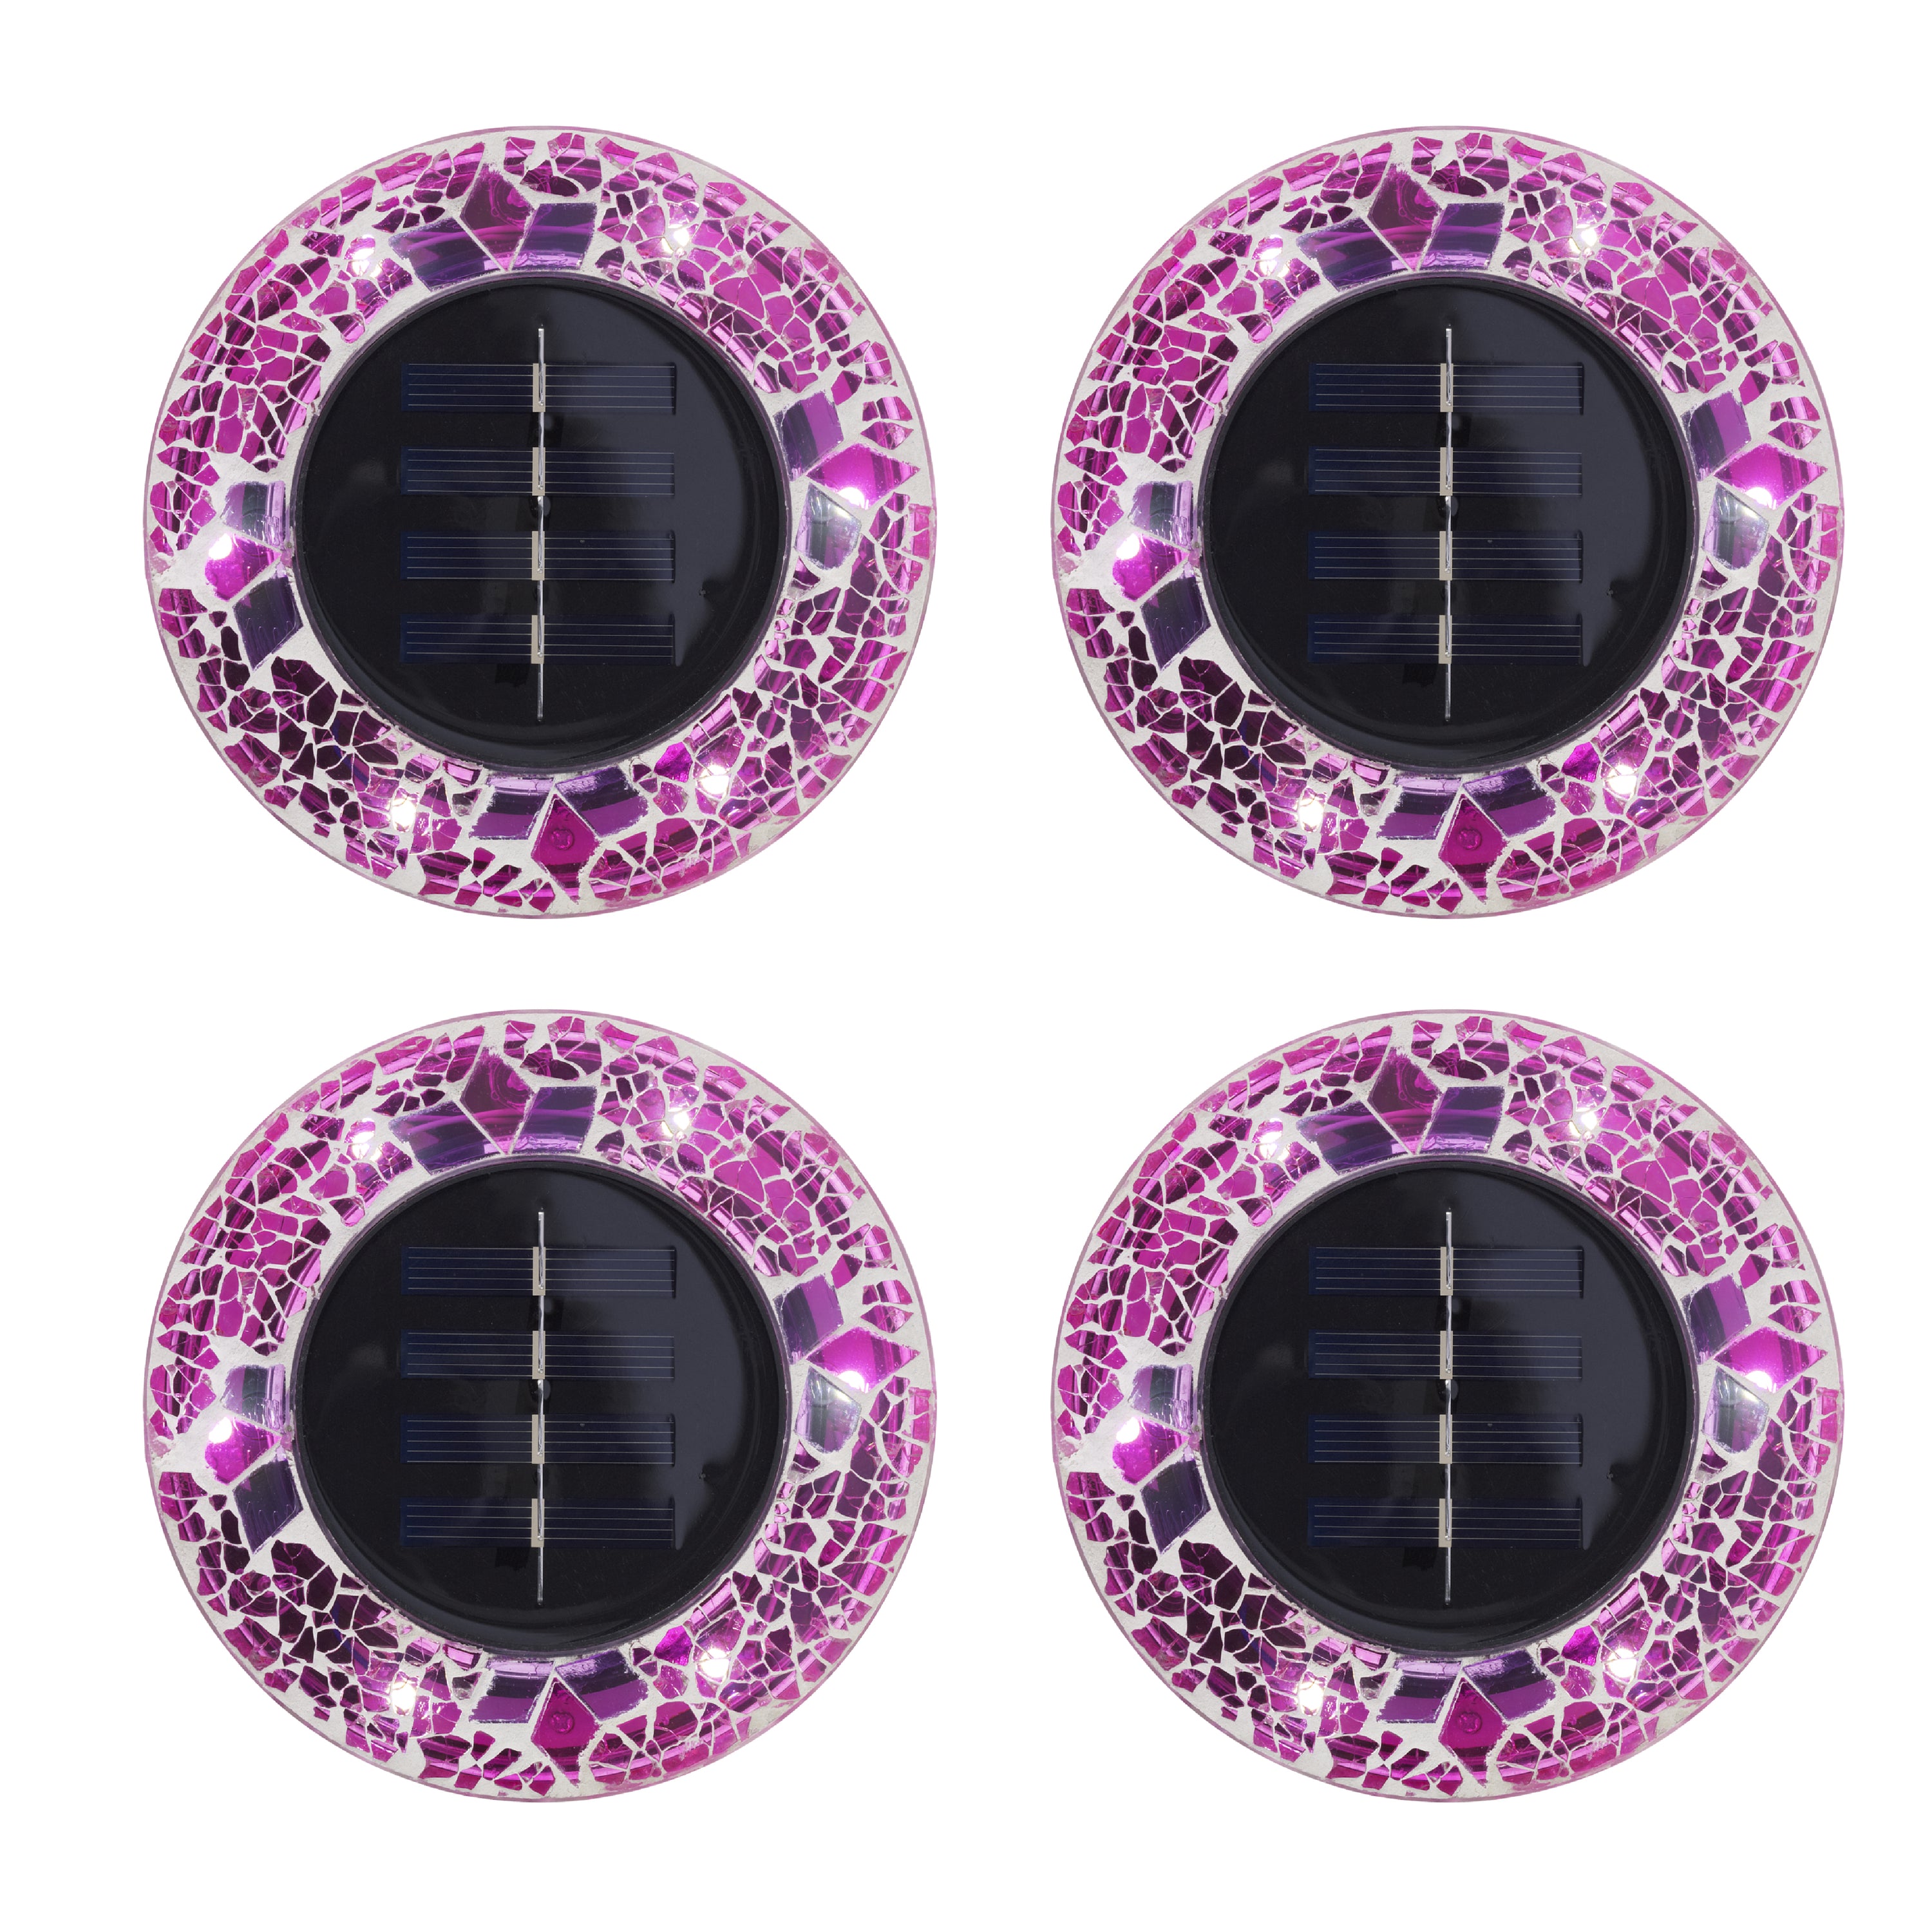 Bell + Howell Pathway & Landscape Disk Lights Mosaic - Pink - 4 Pack